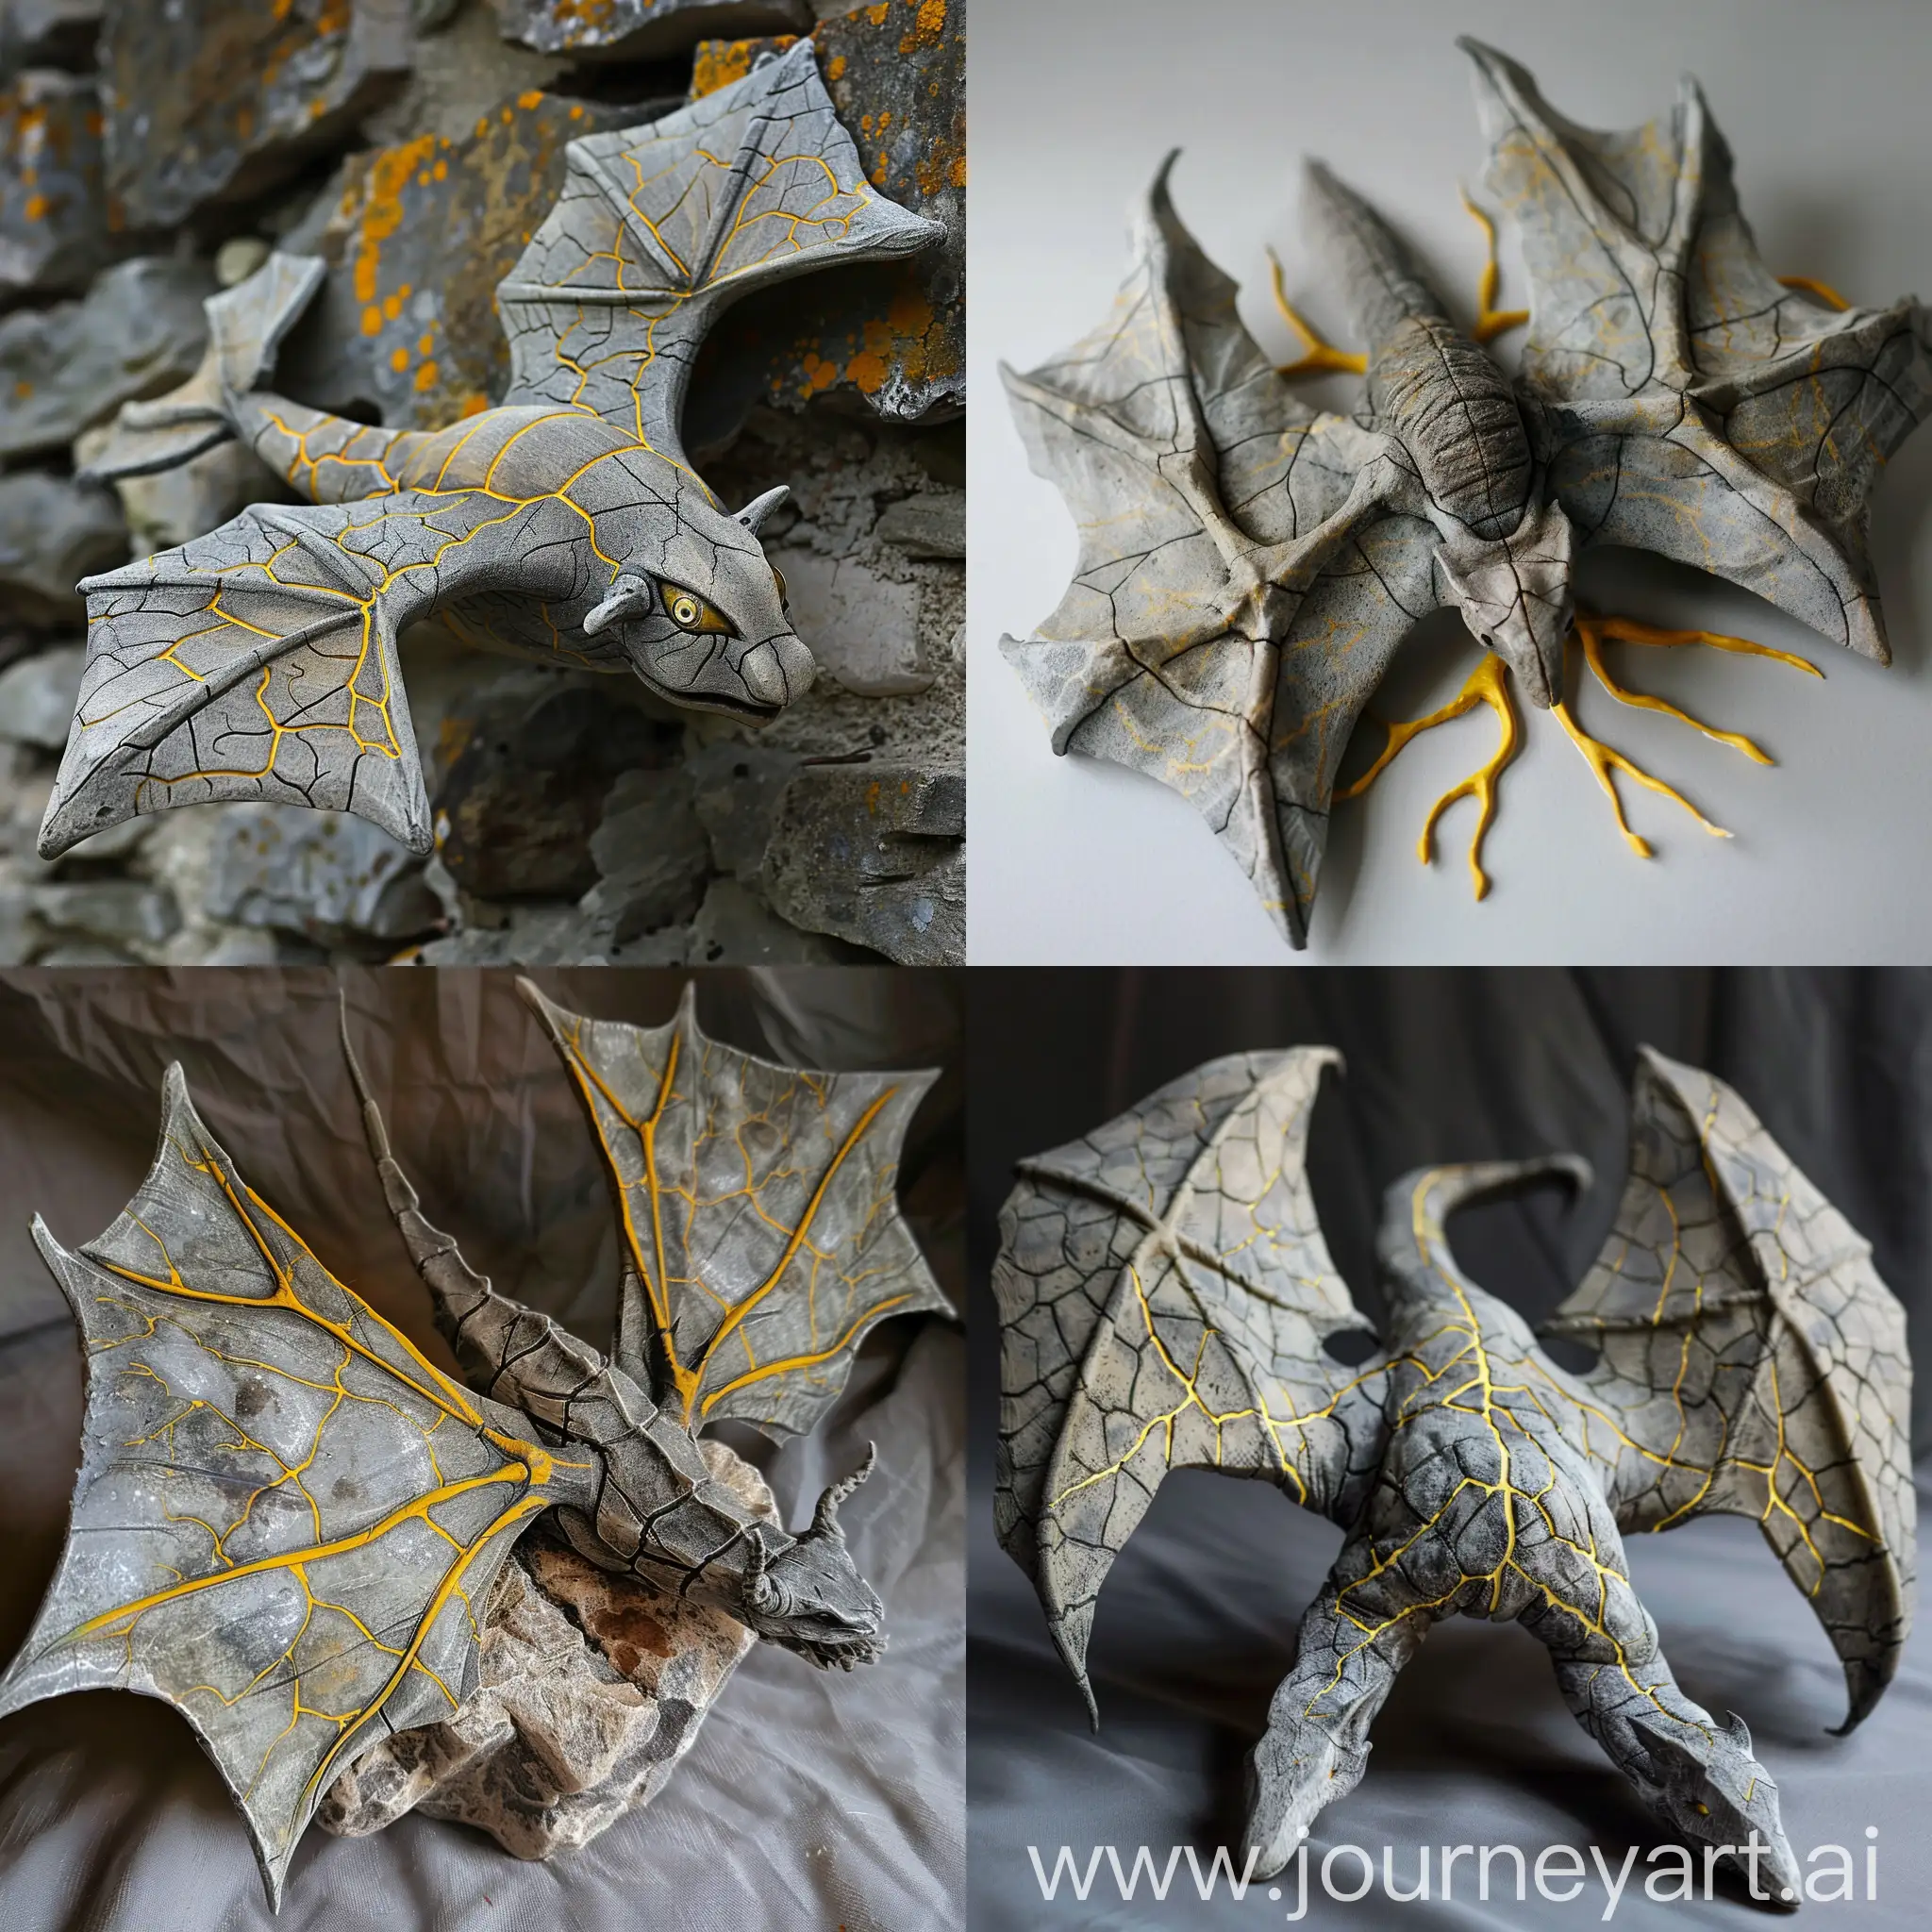 Monstrous-Stone-Flying-Creature-with-Yellow-Veins